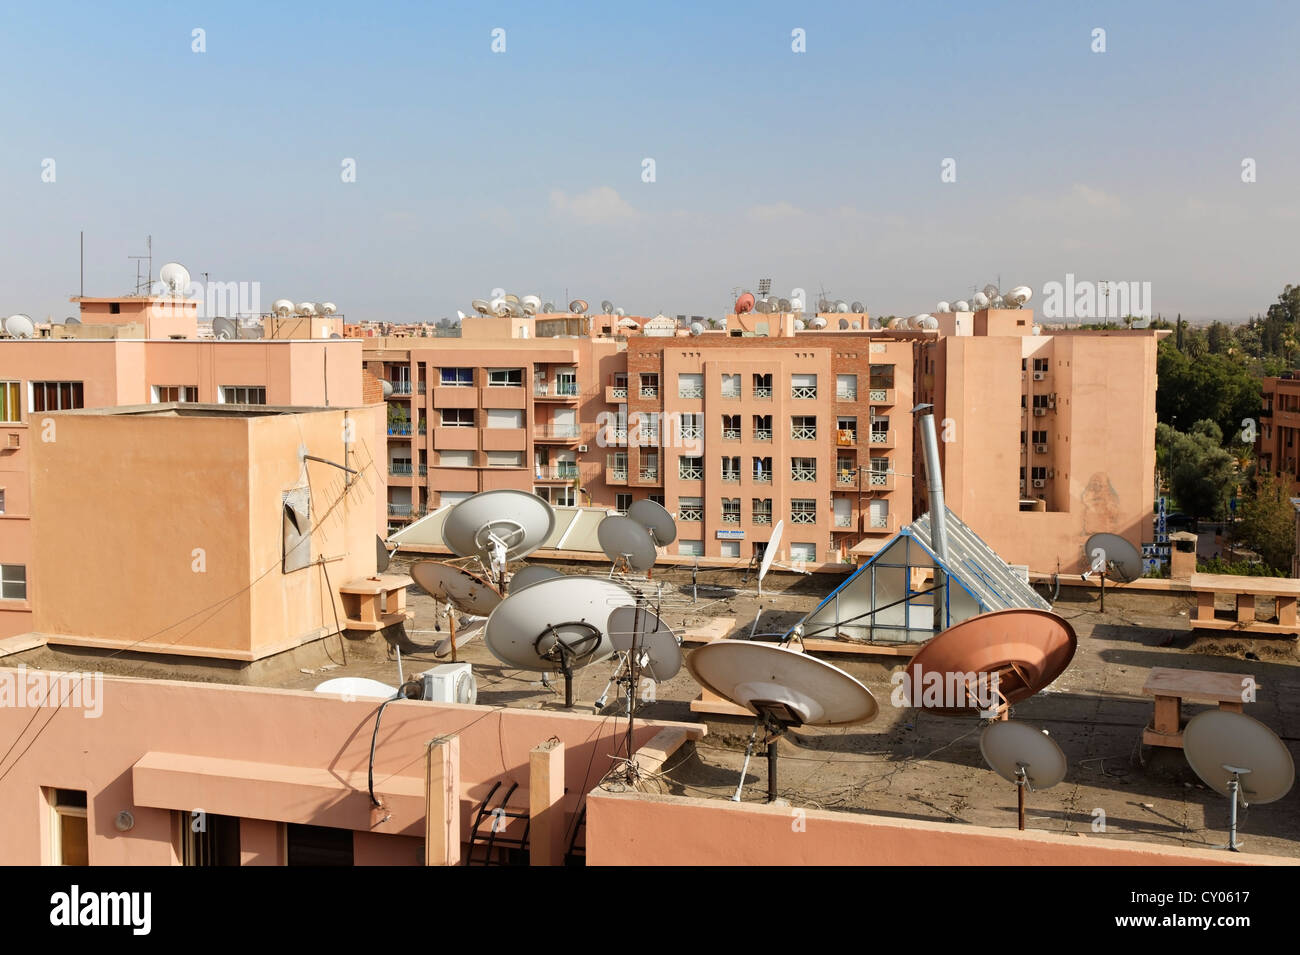 View of the city with numerous satellite dishes, Marrakech, Marrakech-Tensift-El Haouz, Morocco, Mahgreb, North Africa, Africa Stock Photo